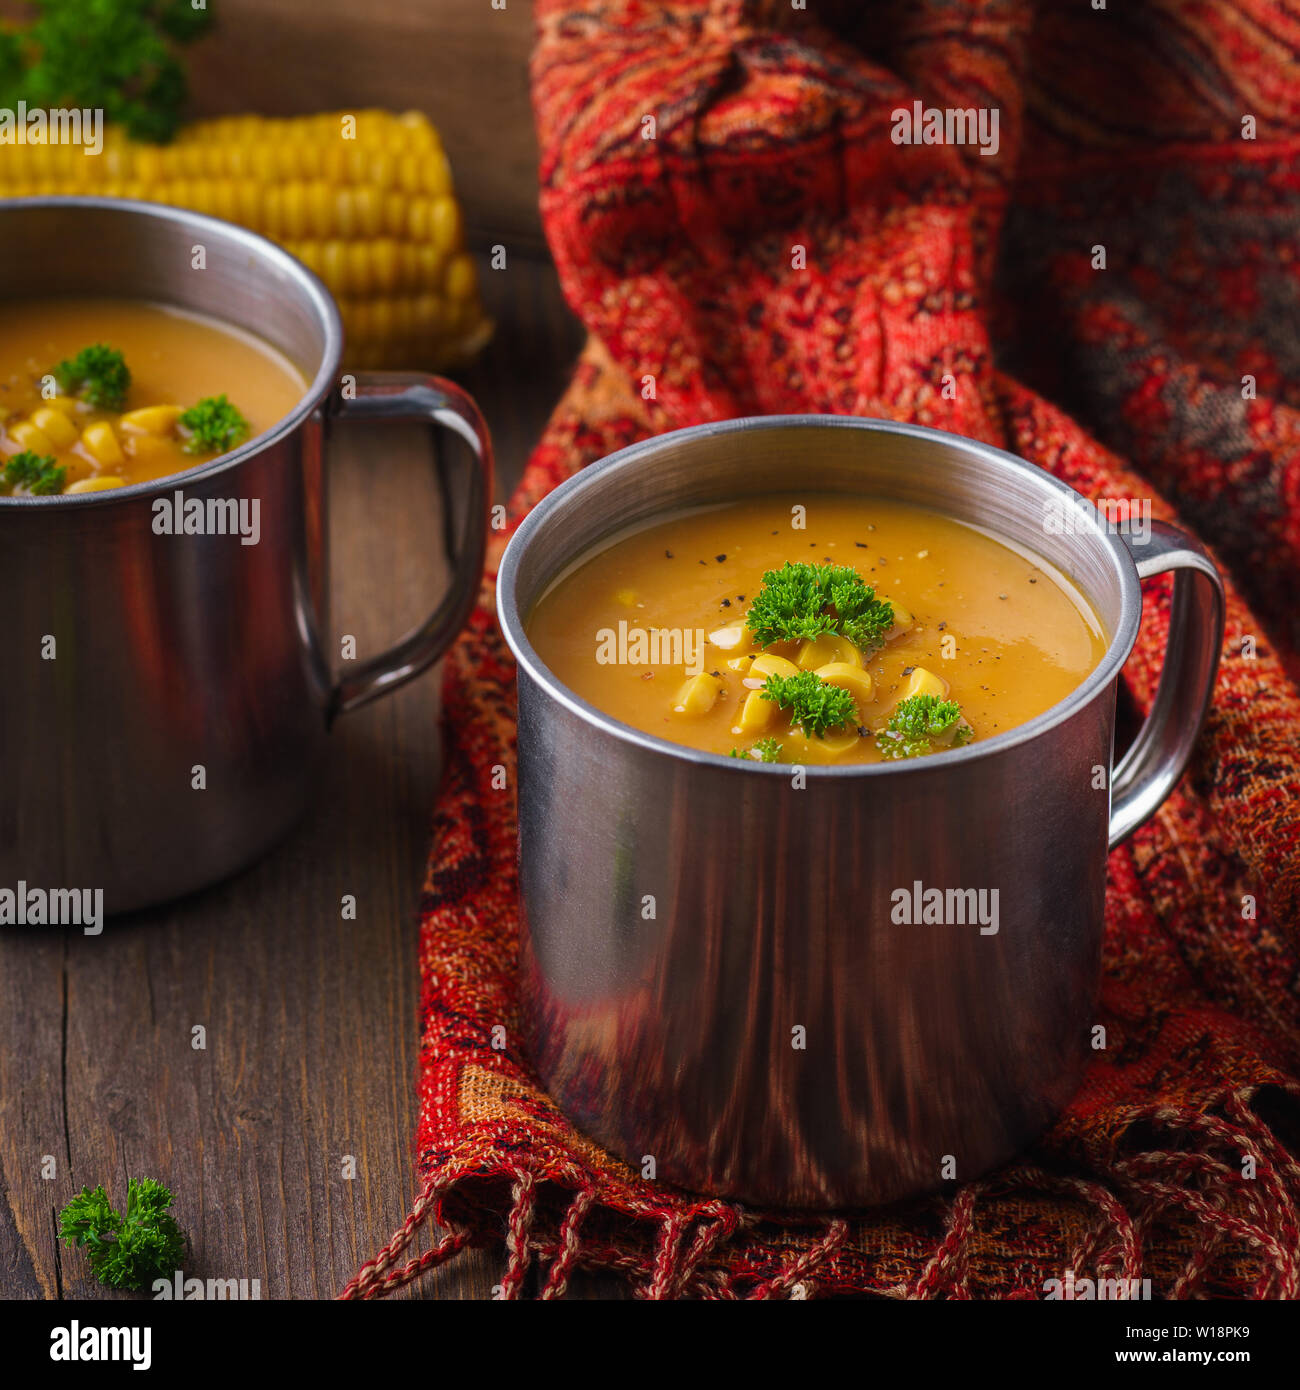 Pumpkin vegetable soup in a mug on a dark wooden background. Healthy autumn food Stock Photo